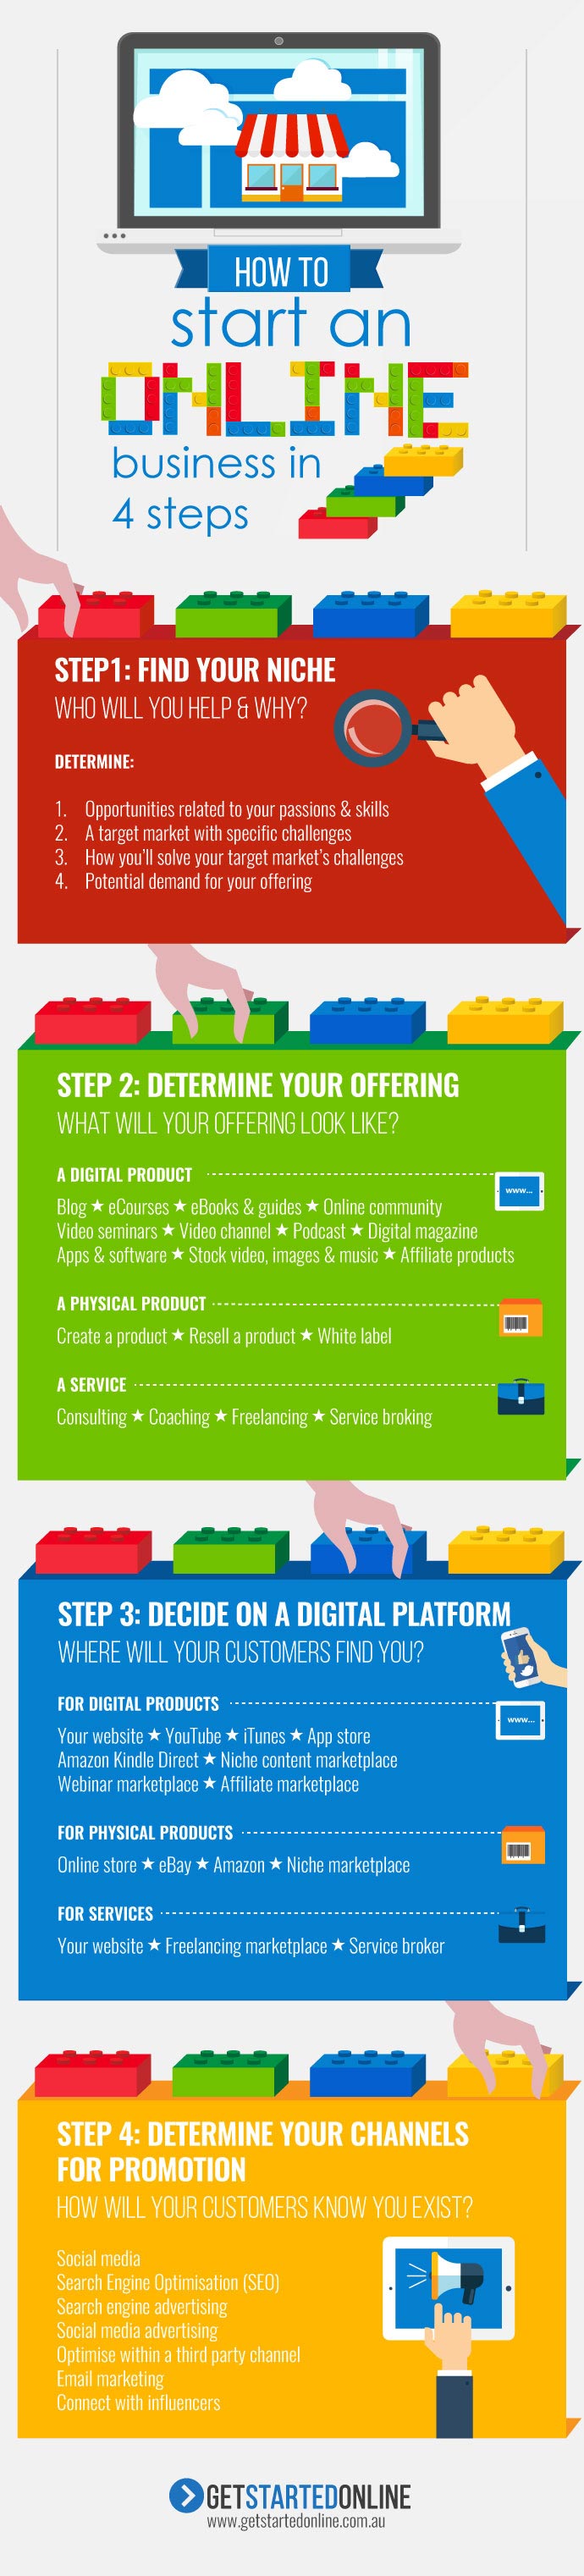 How to start an online business in 4 steps infographic